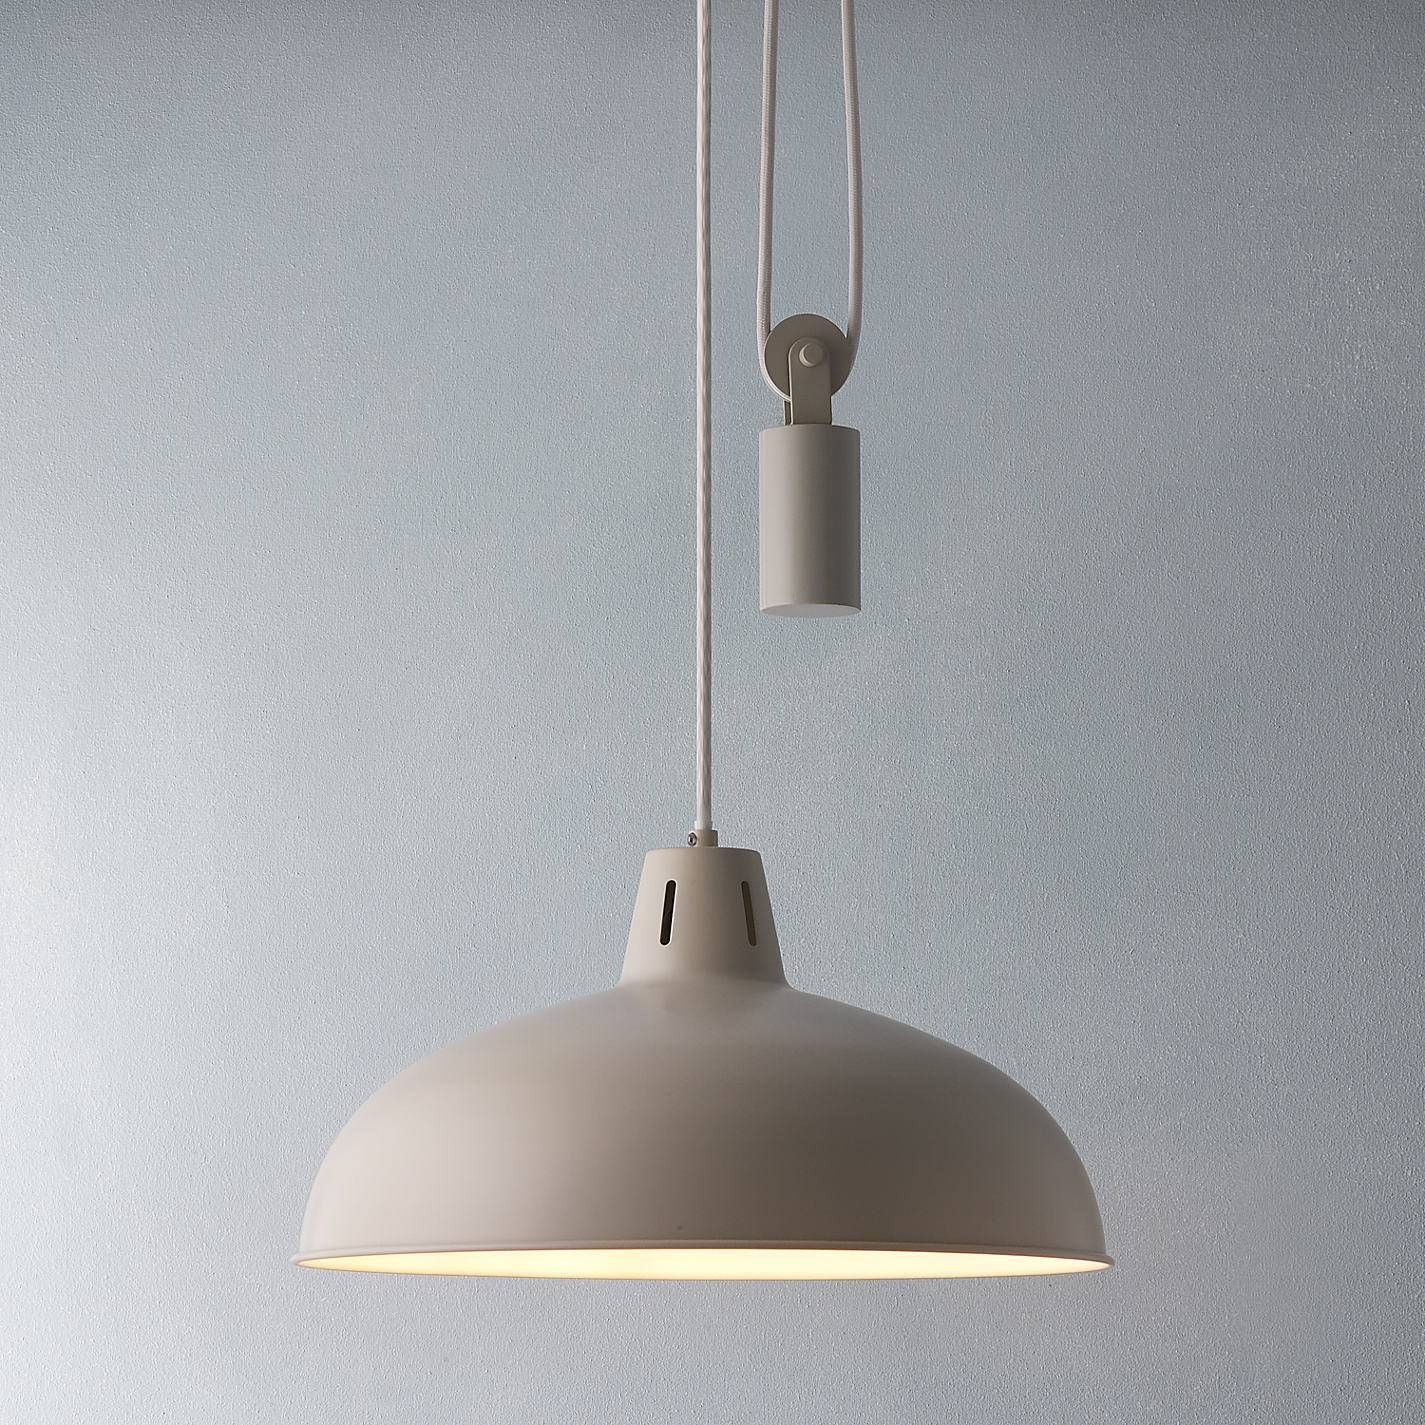 Fresh Retractable Ceiling Light 97 For Your Edison Pendant Light Within Retractable Pendant Lights (Photo 1 of 15)